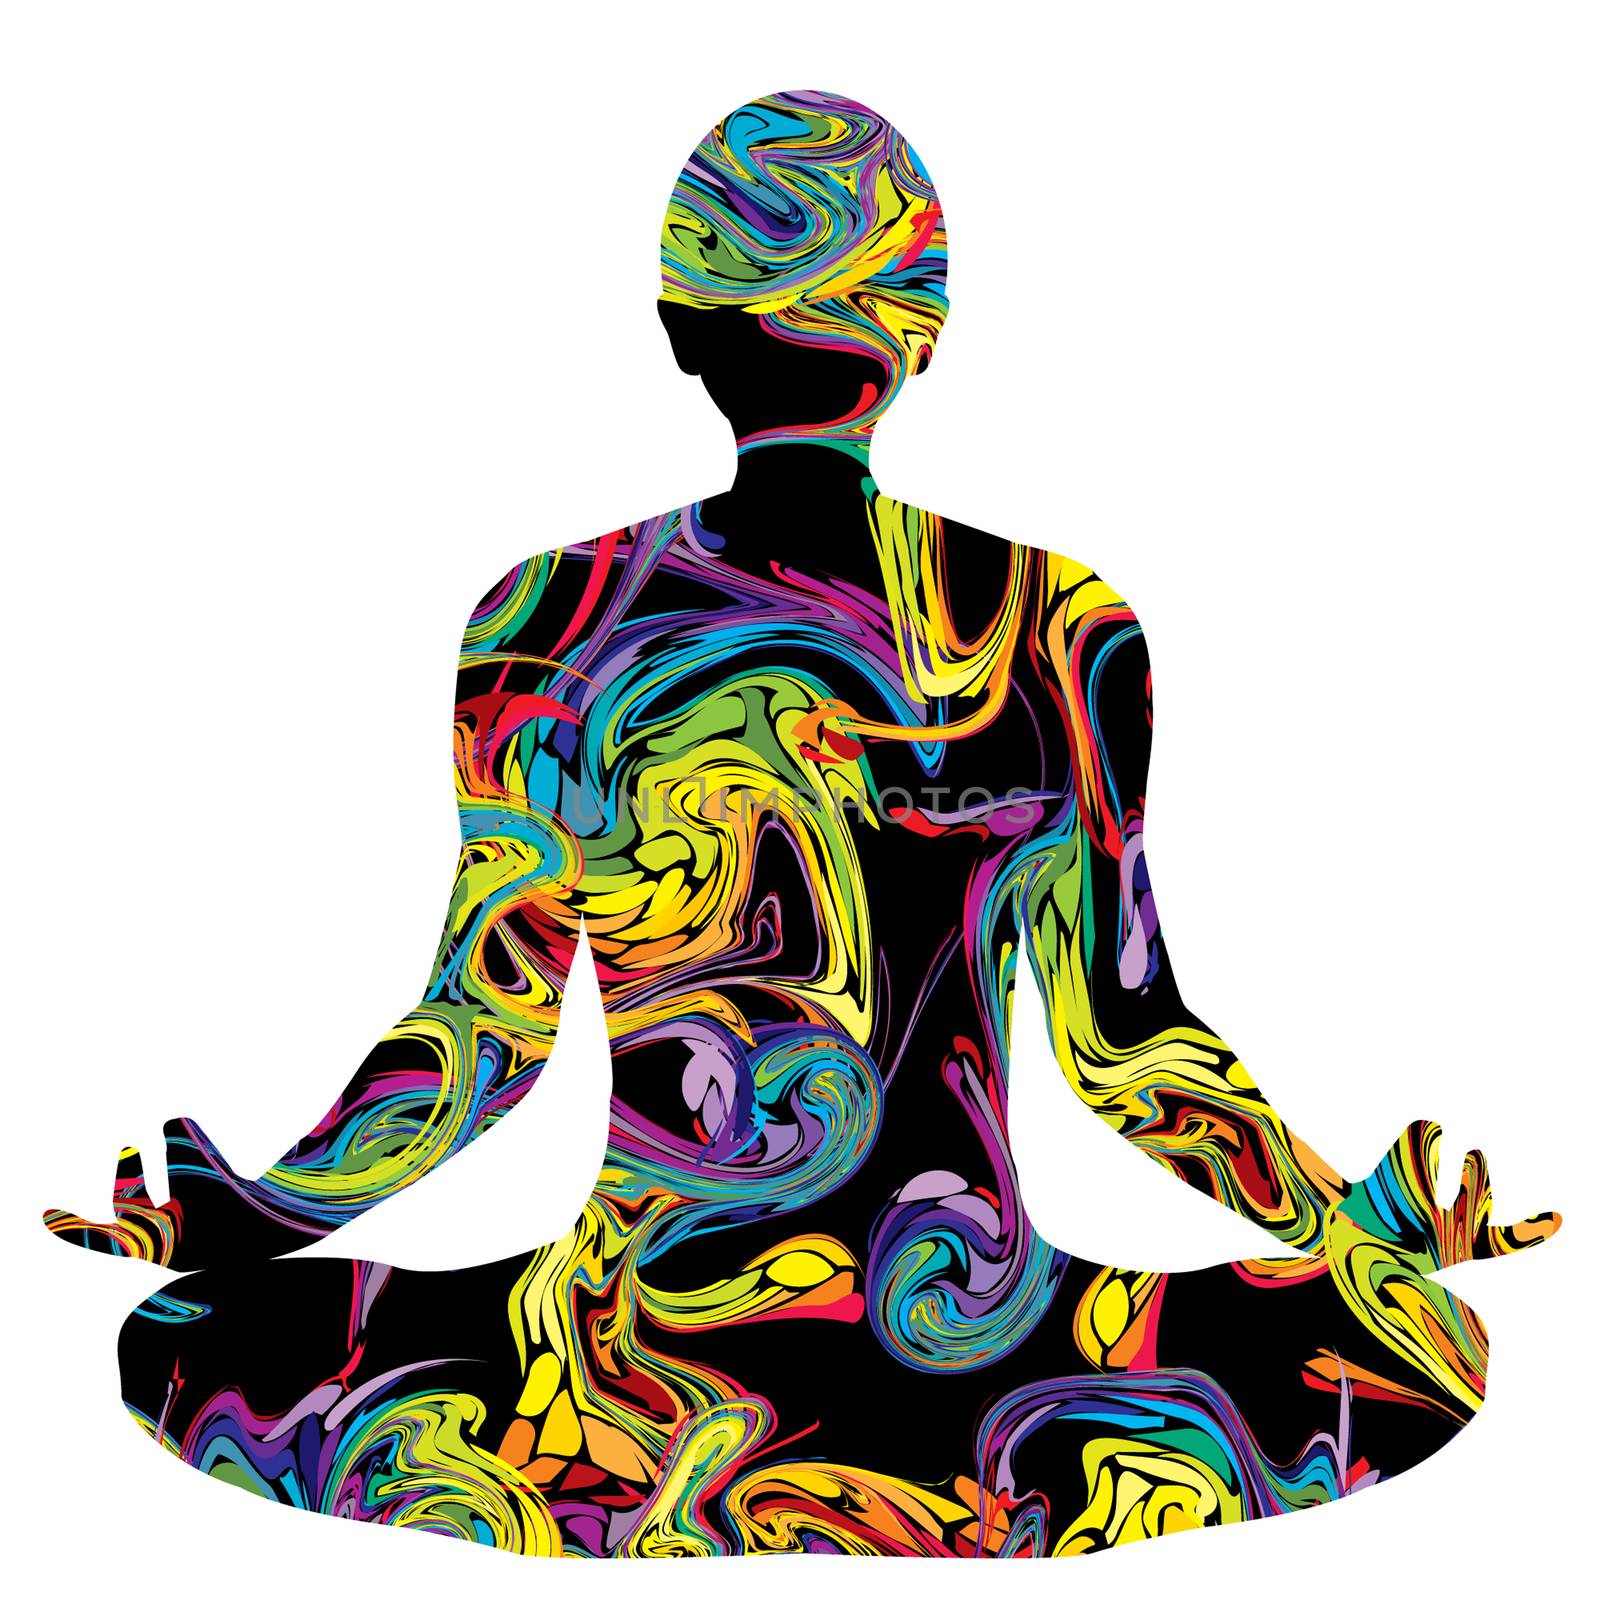 Colorful silhouette of a man in lotus pose